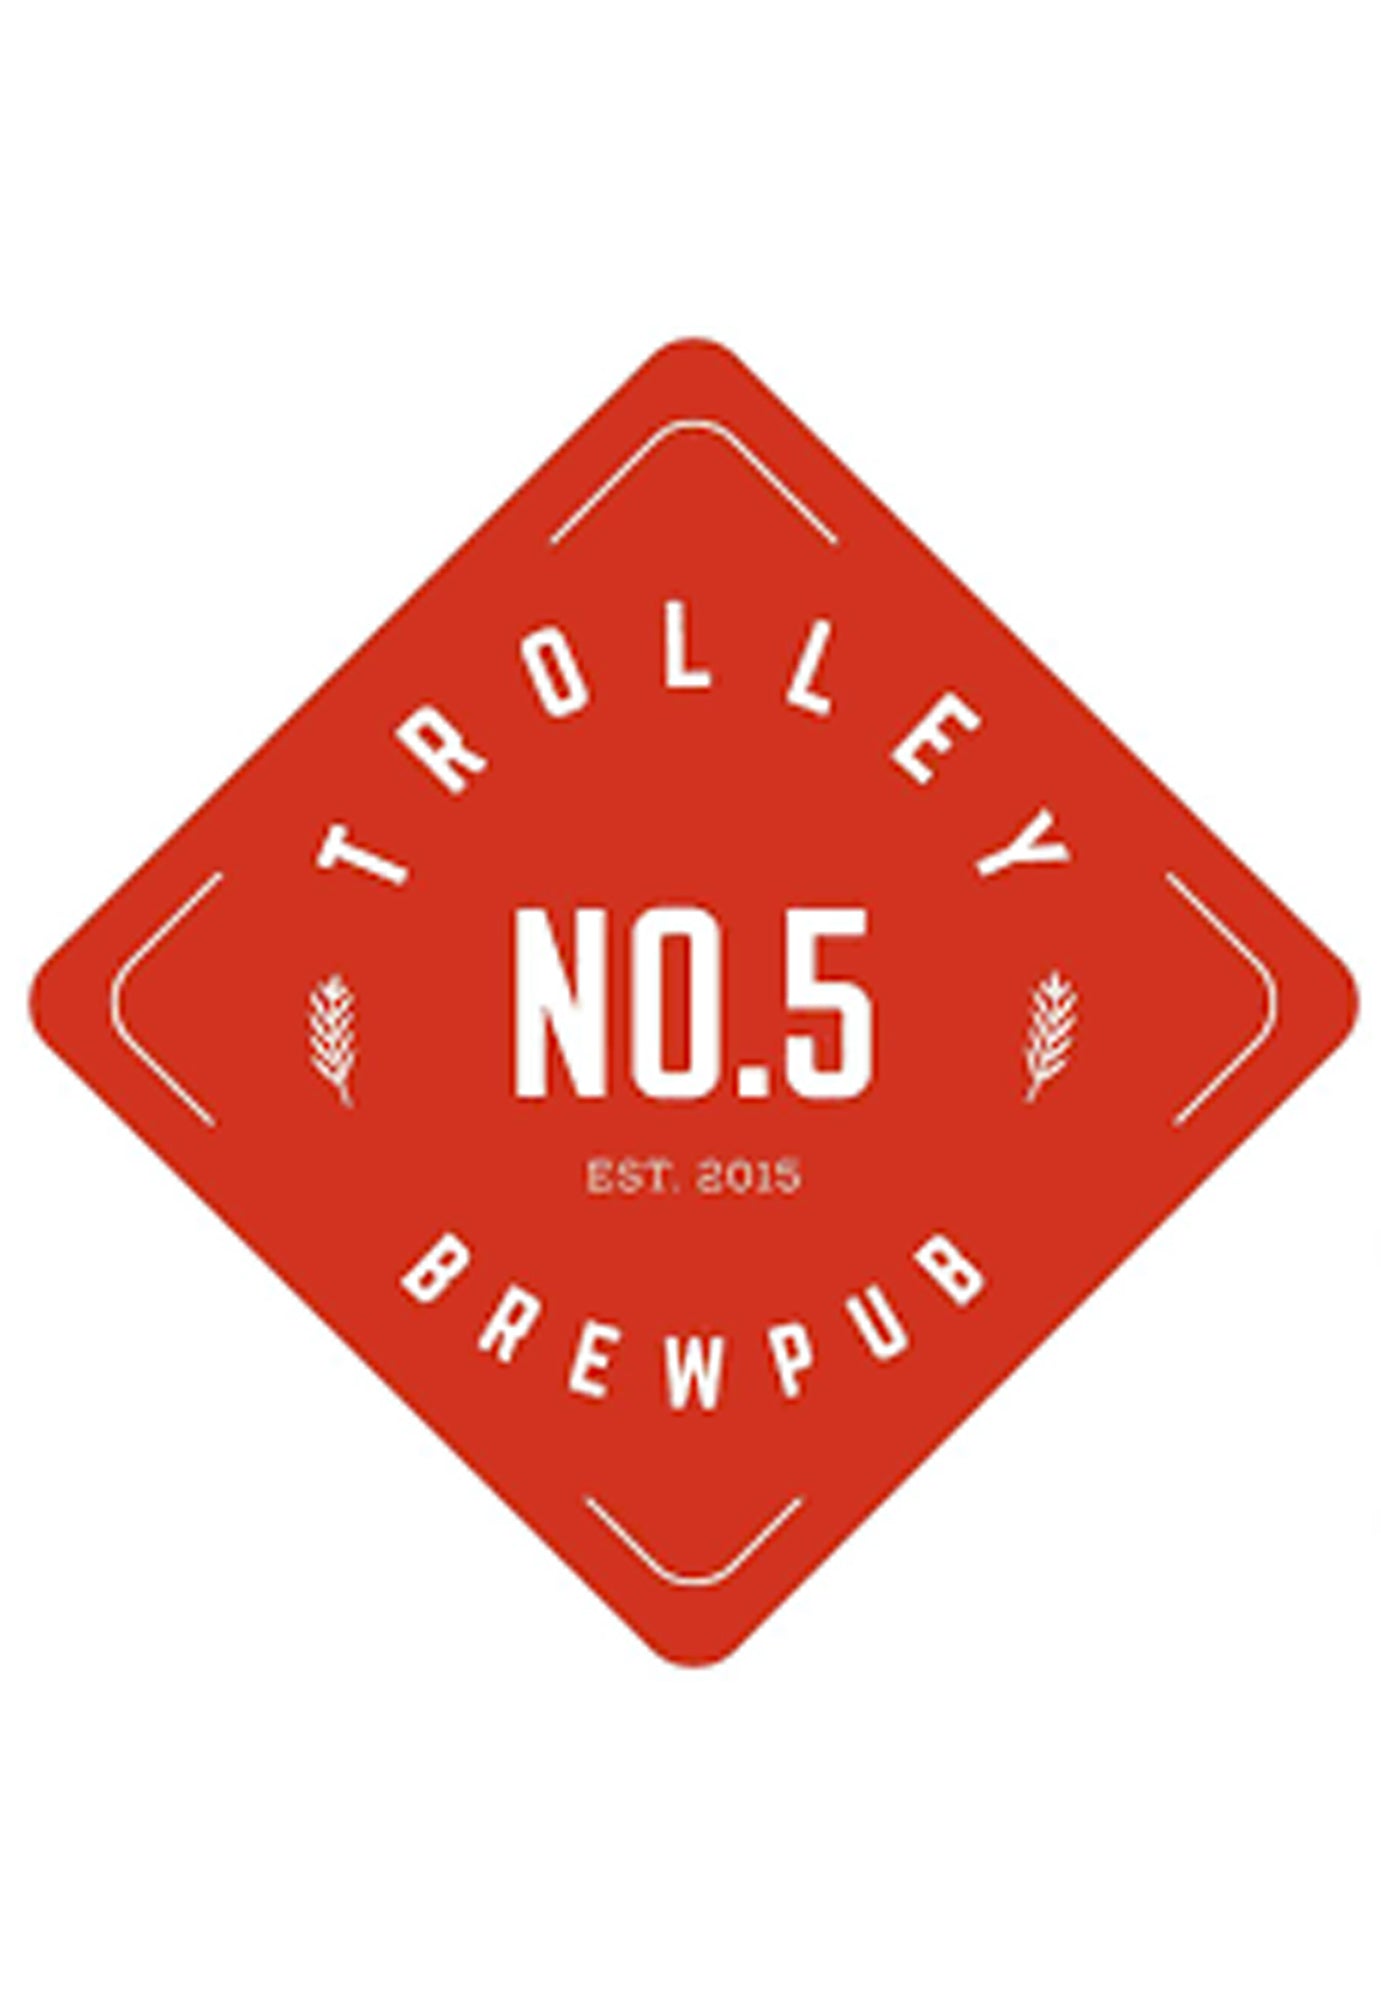 Trolley 5 Conductor Lager 473 ml -  4 Cans